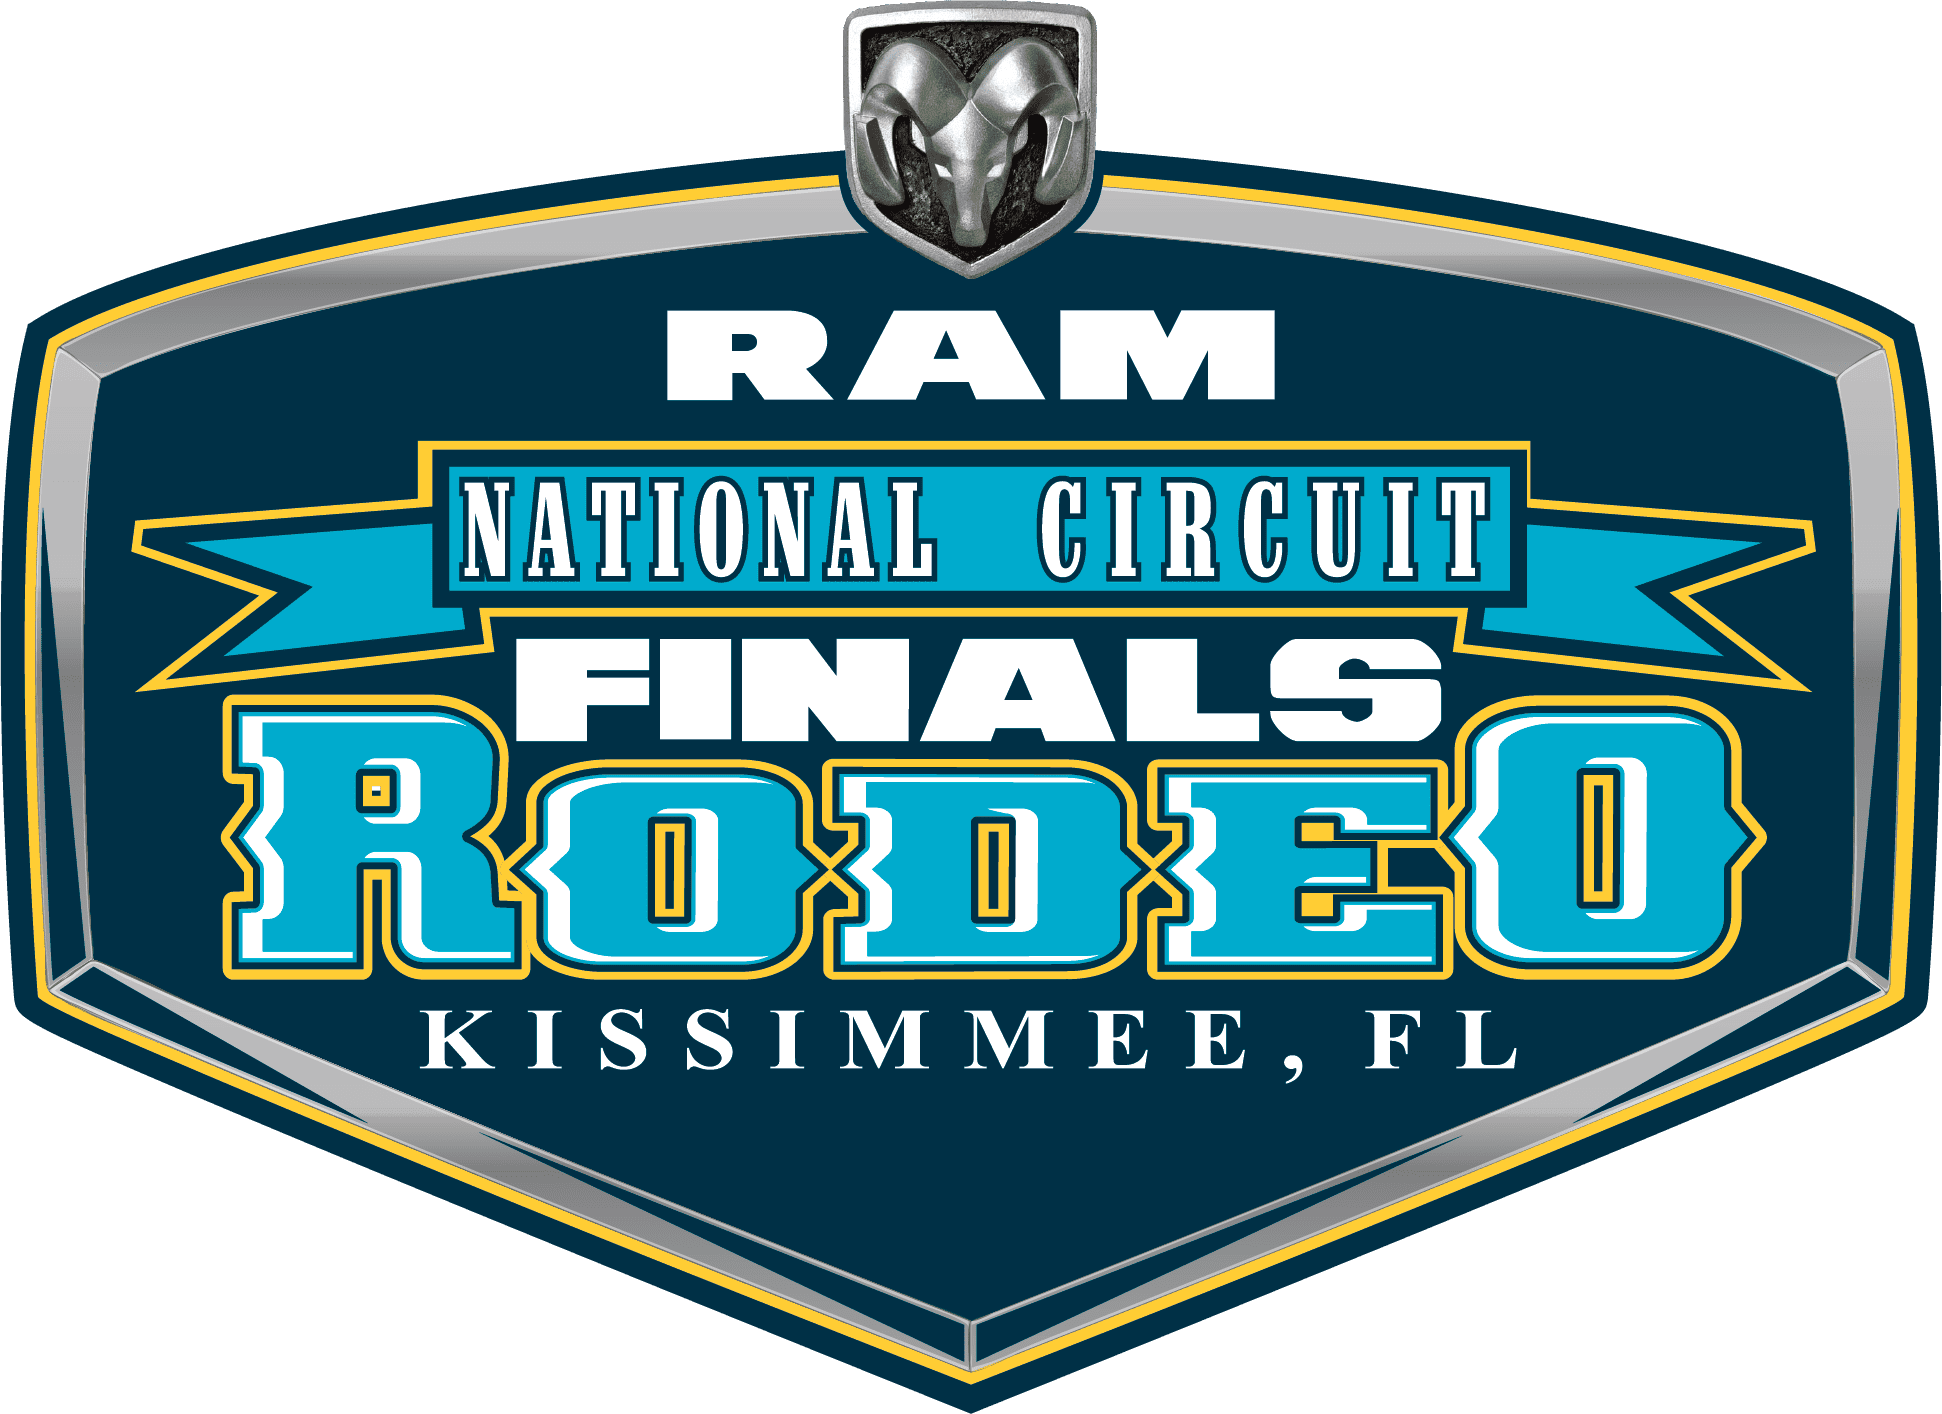 NFR Logo - RAM National Circuit Finals Rodeo. Rodeo in Kissimmee